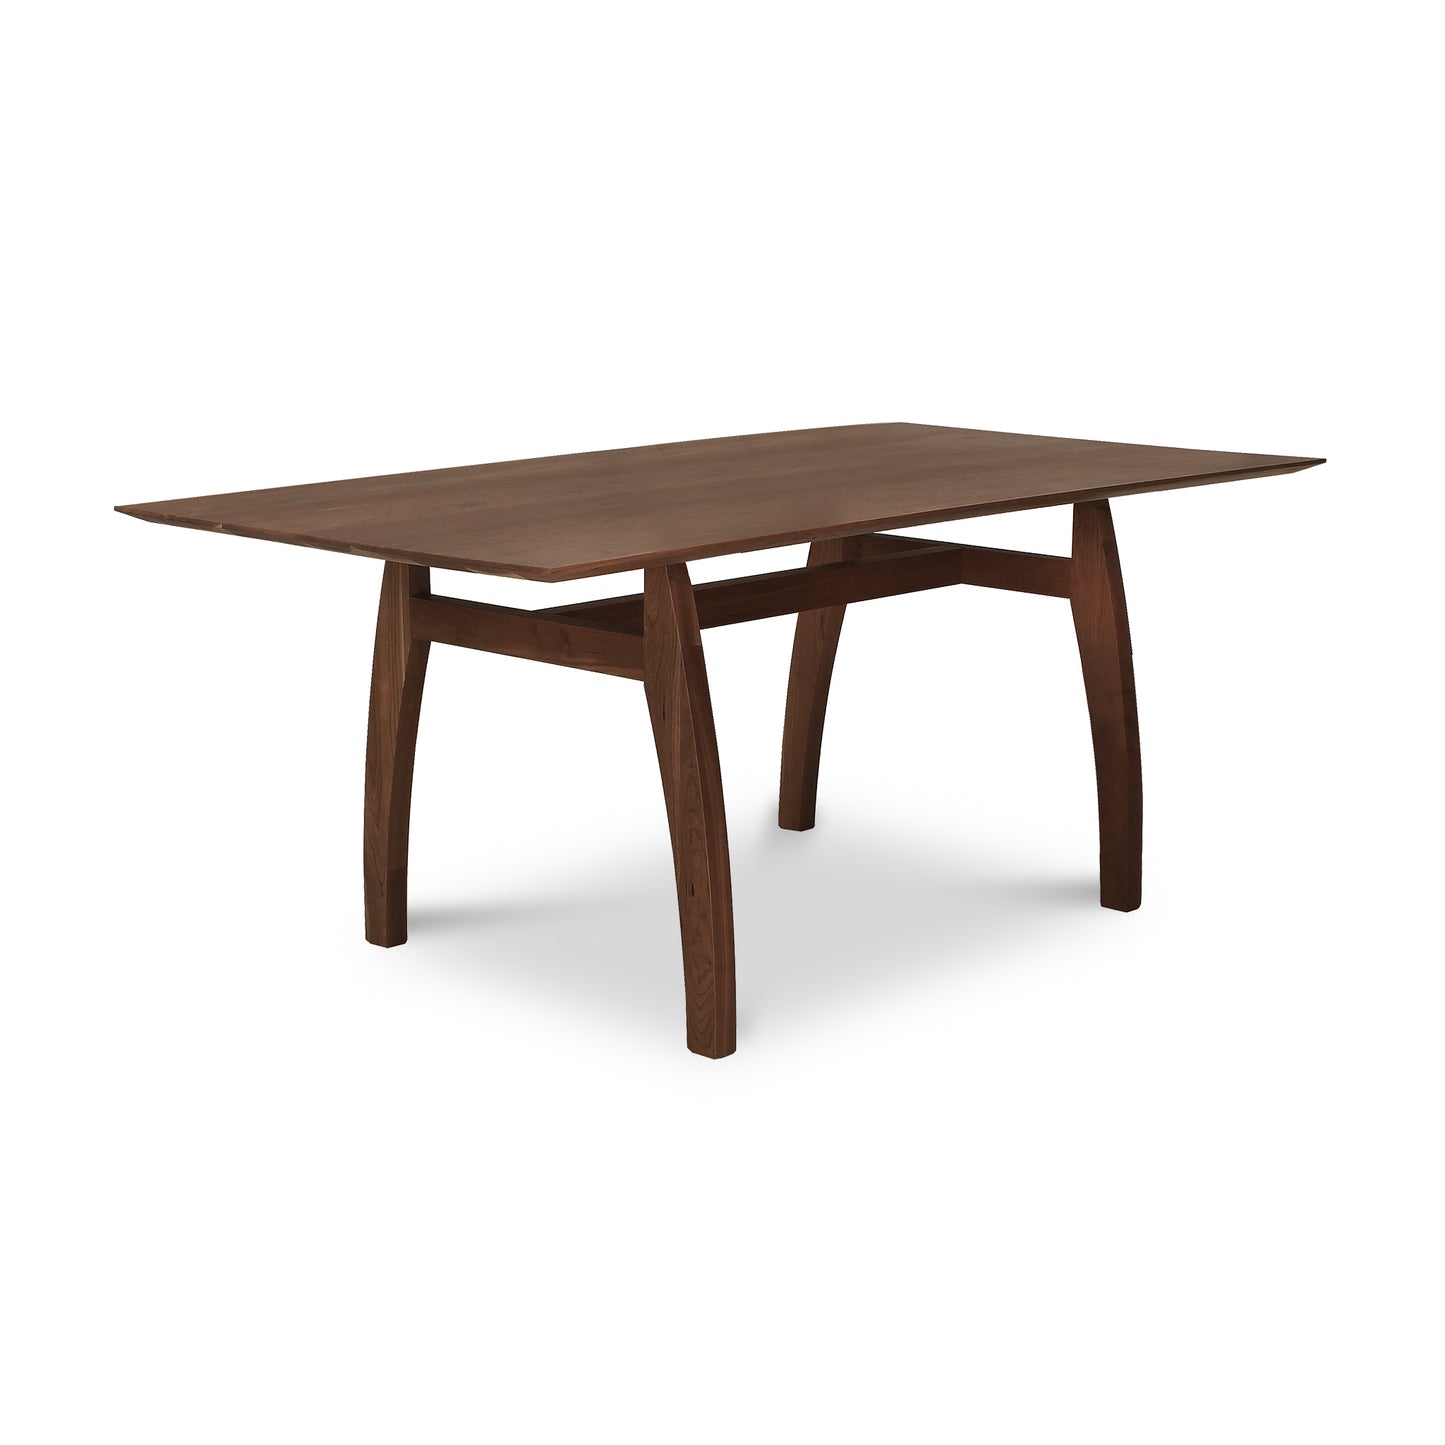 A high-end Lyndon Furniture Vermont Modern Solid Top Trestle table with solid top and legs.